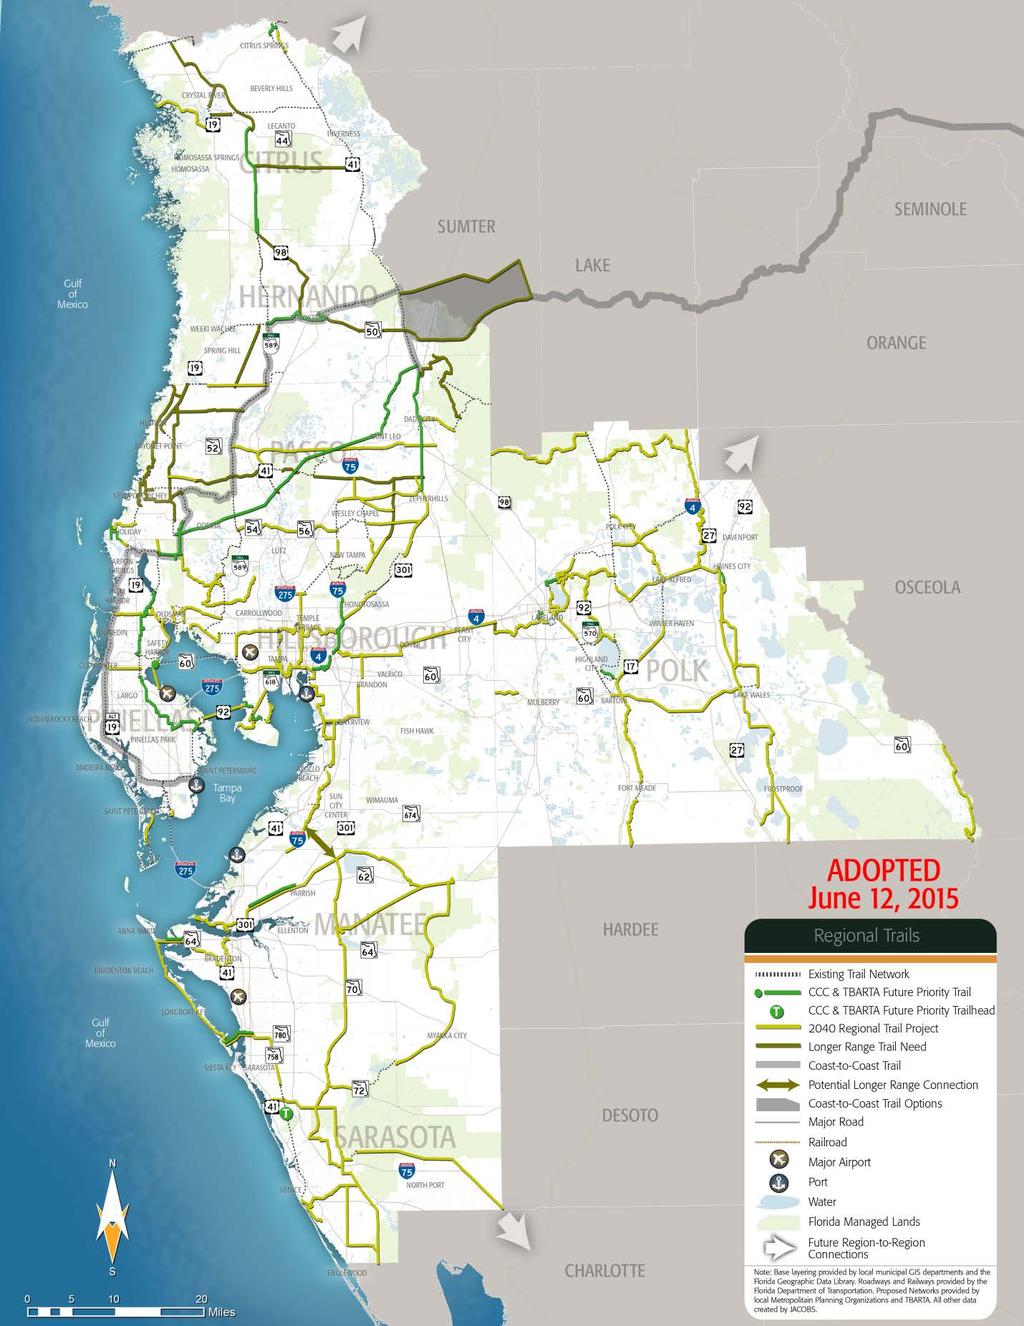 Figure 6-1: 2040 and Longer Range Regional Multi-Use Trail Projects Tampa Bay